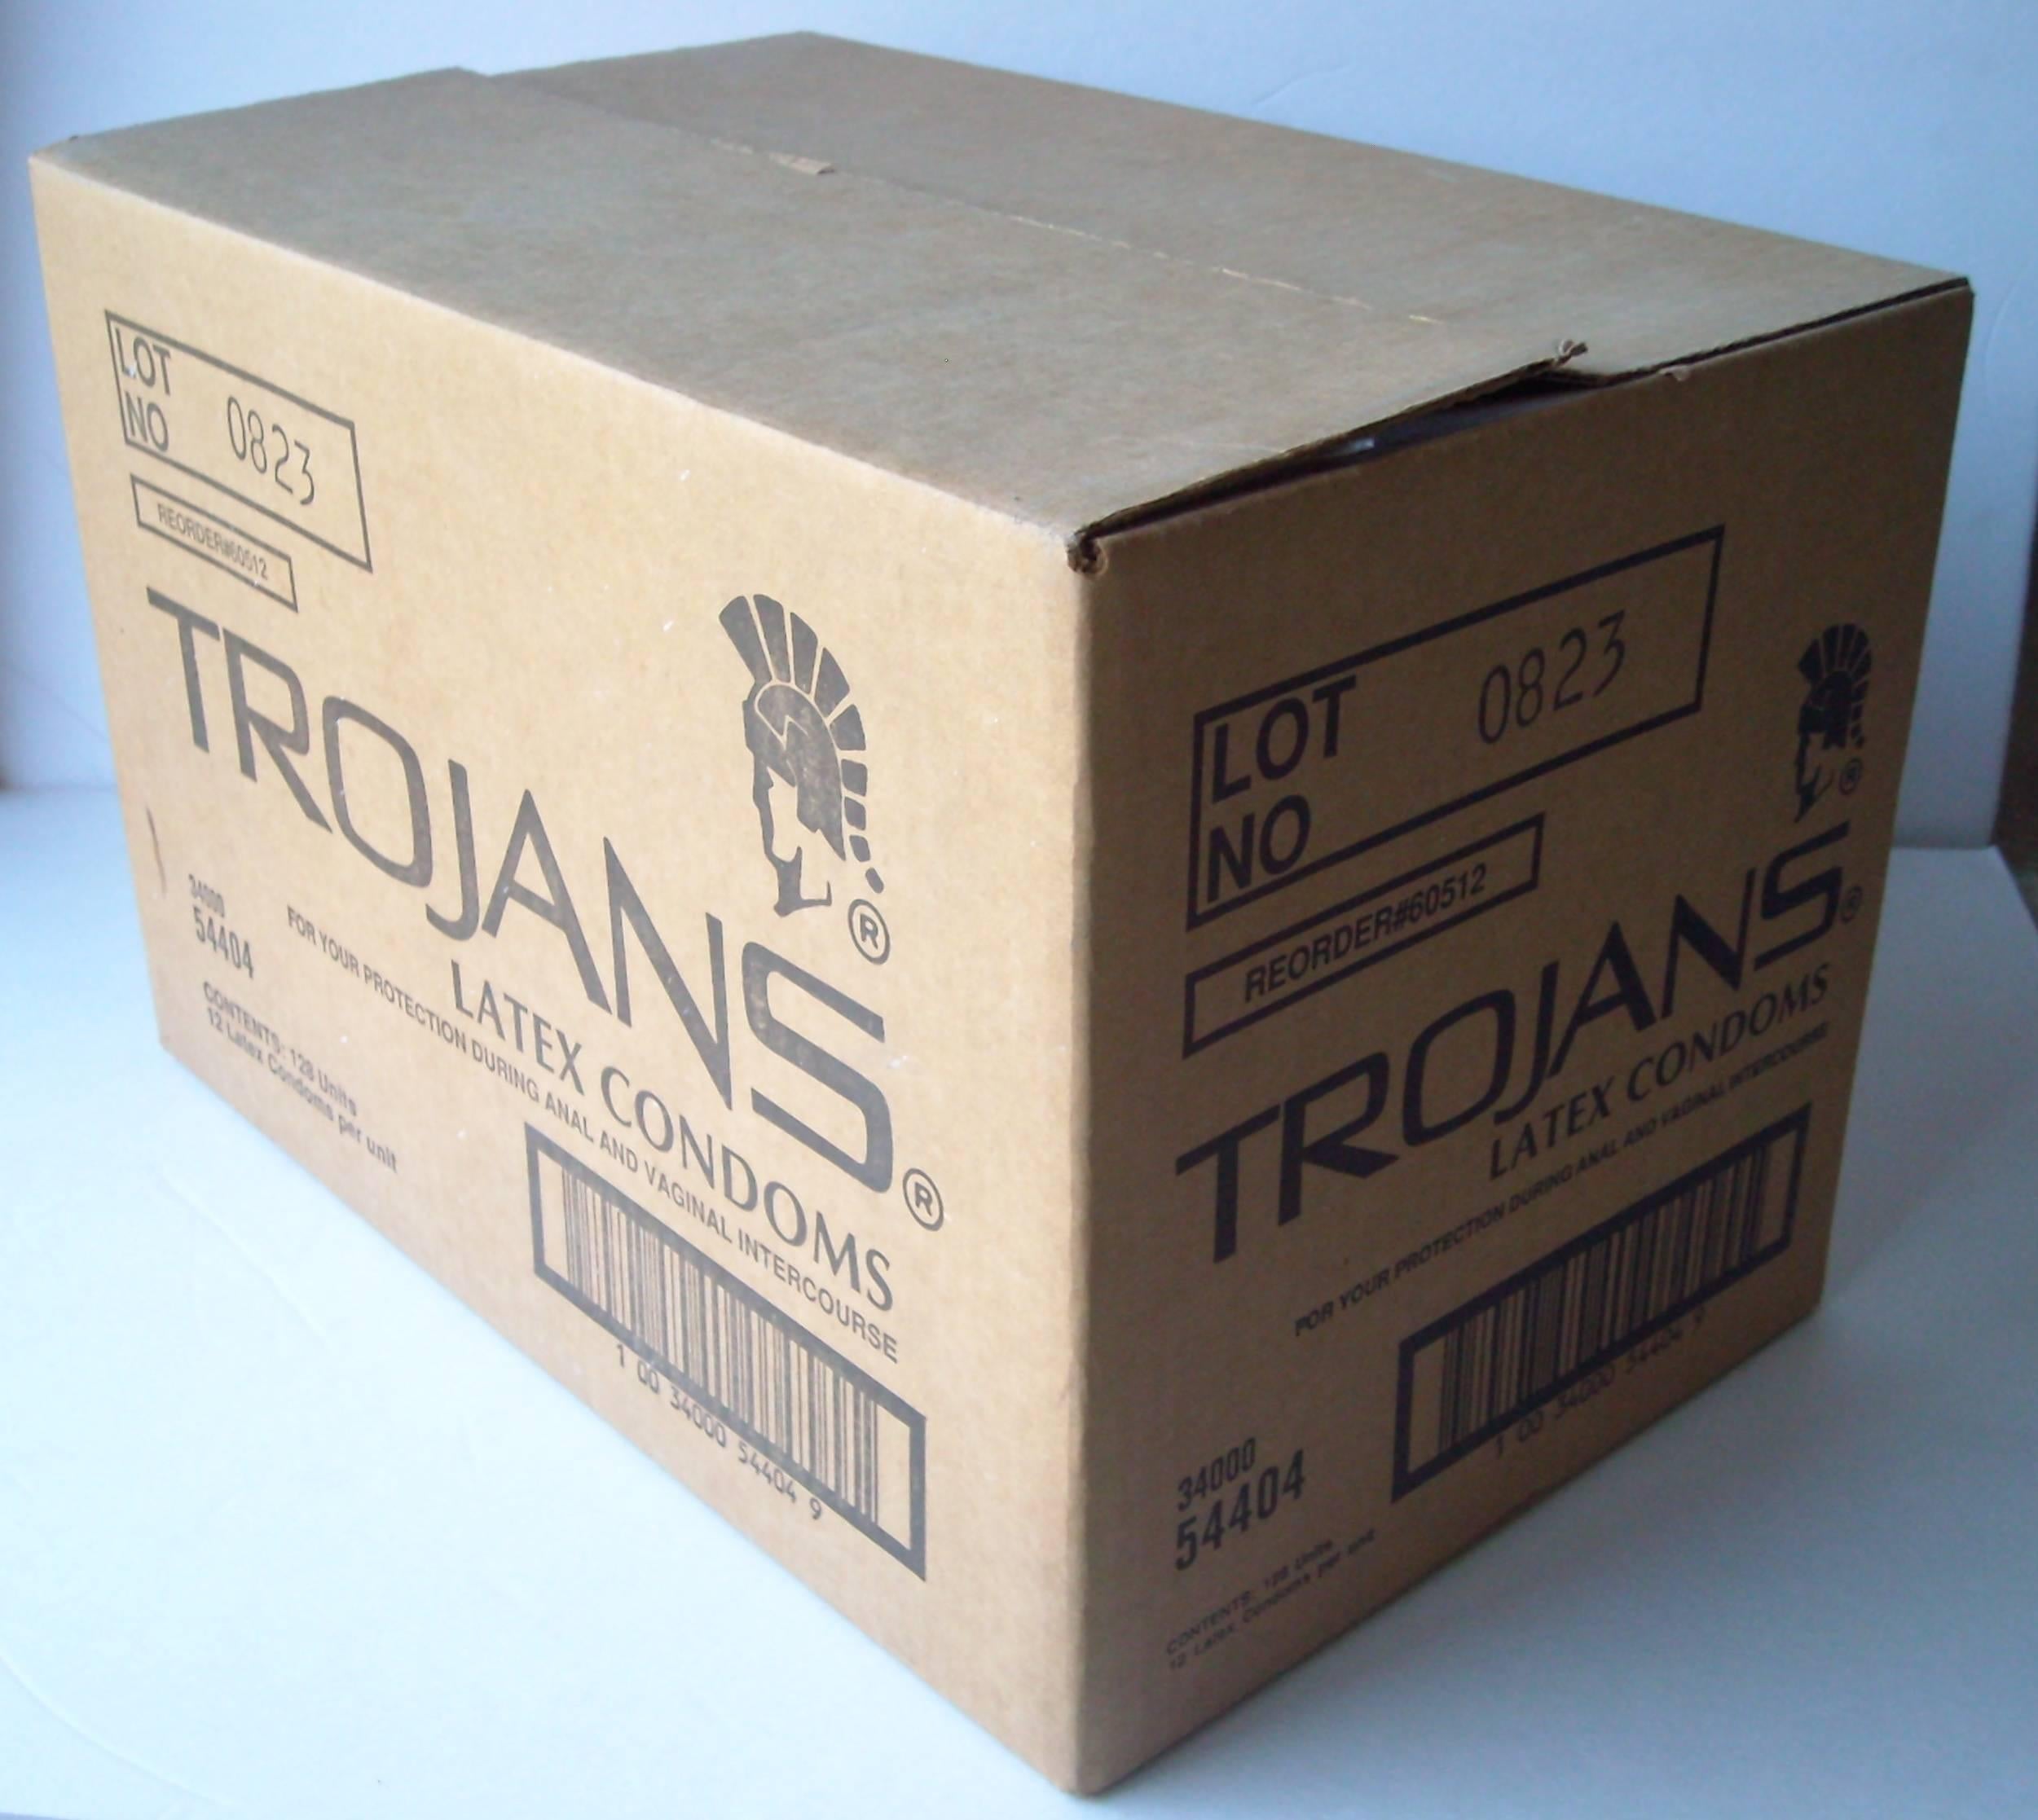 Great pop art sample in this Trojans box, sculpture, dated and signed, edition of 1000. Adam Rolston. Cardboard, empty box. Numbered 0823/1000.